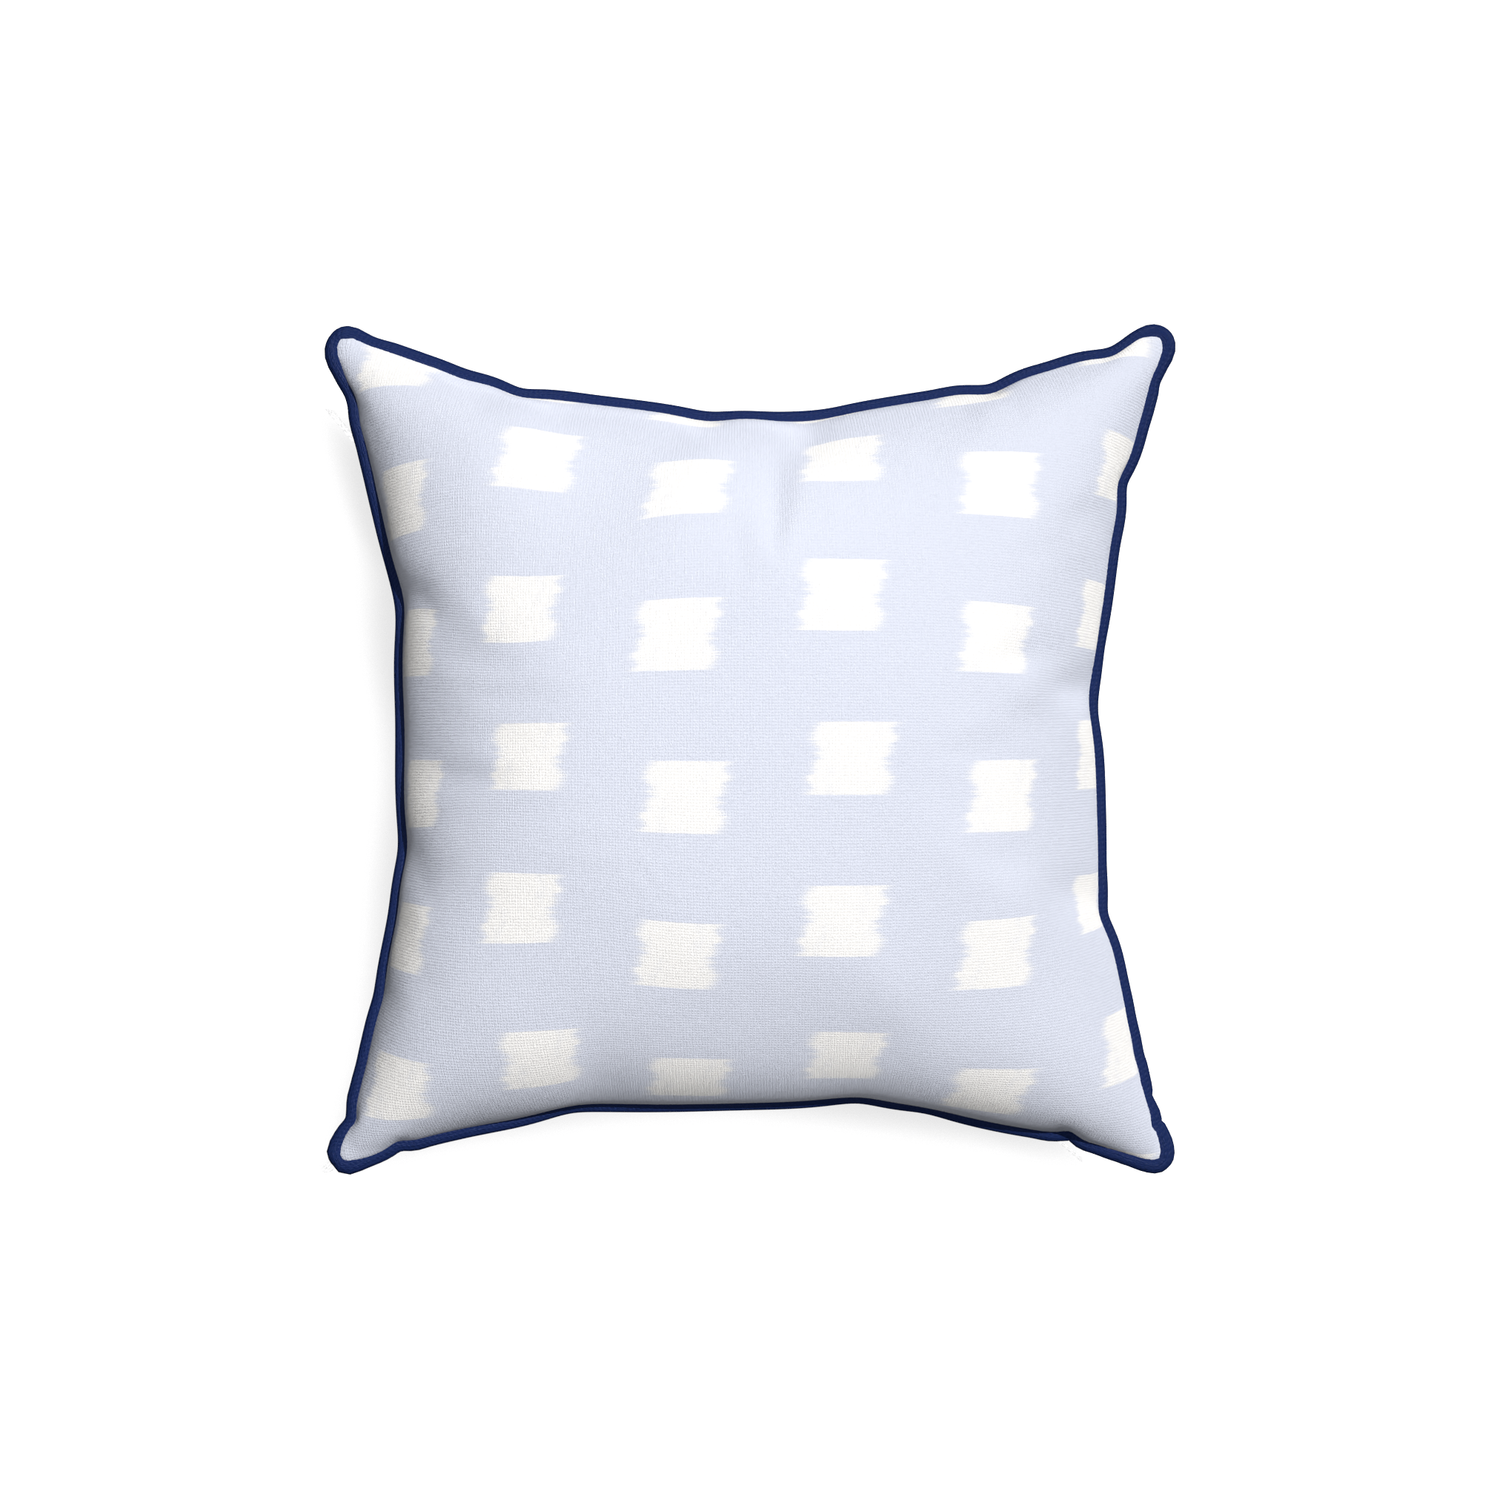 18-square denton custom pillow with midnight piping on white background